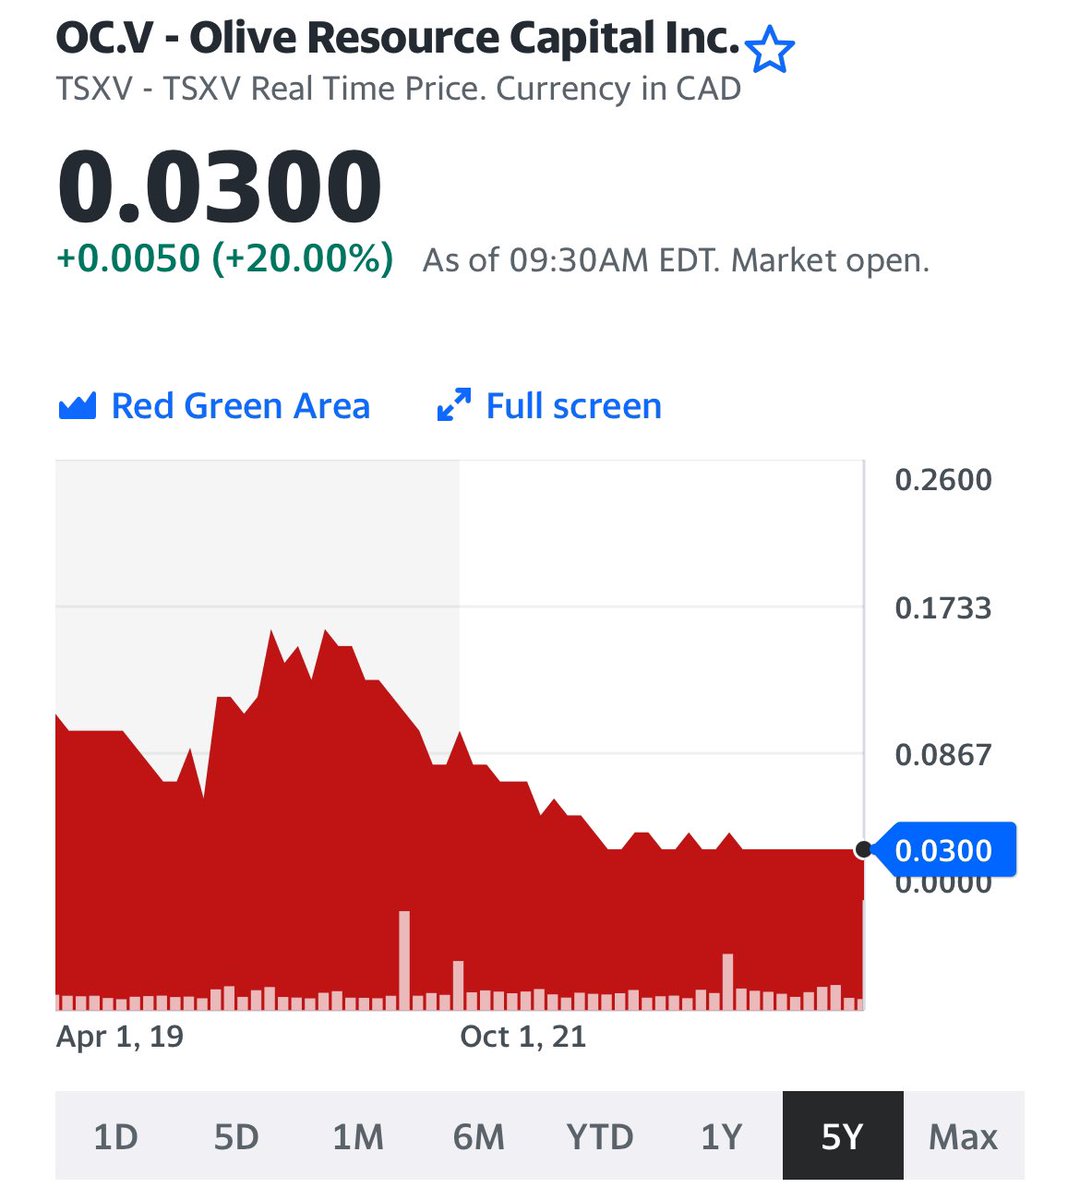 OC.V - Olive Resource Capital Inc.
TSXV - TSXV

May be ready to move up ⬆️!! Keep an eye on it !!

This post is not financial advice.

#canadianstocks #Canada #StocksToBuy #tsx